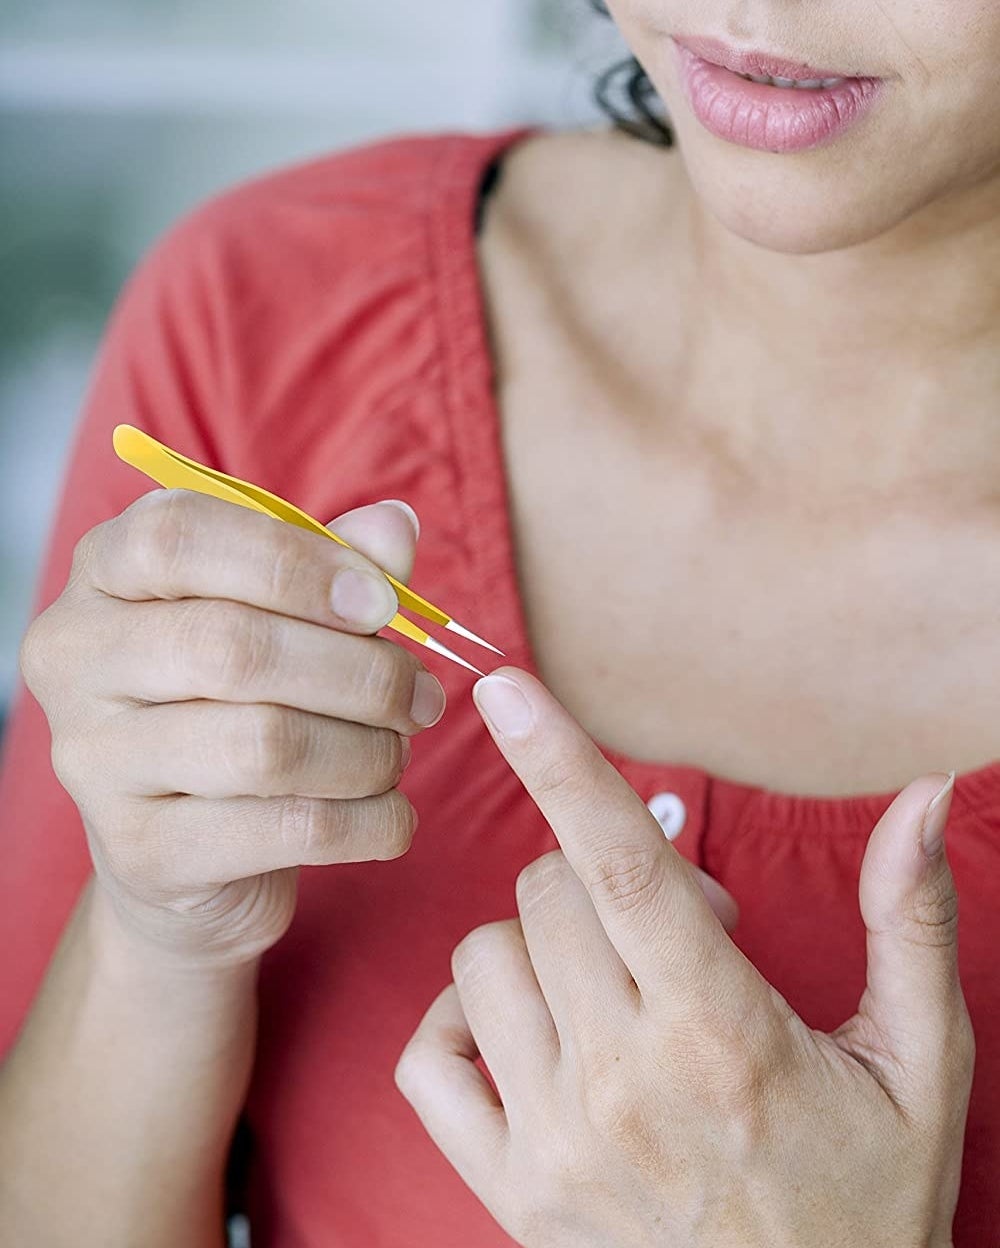 A person removes a splinter from their fingertip